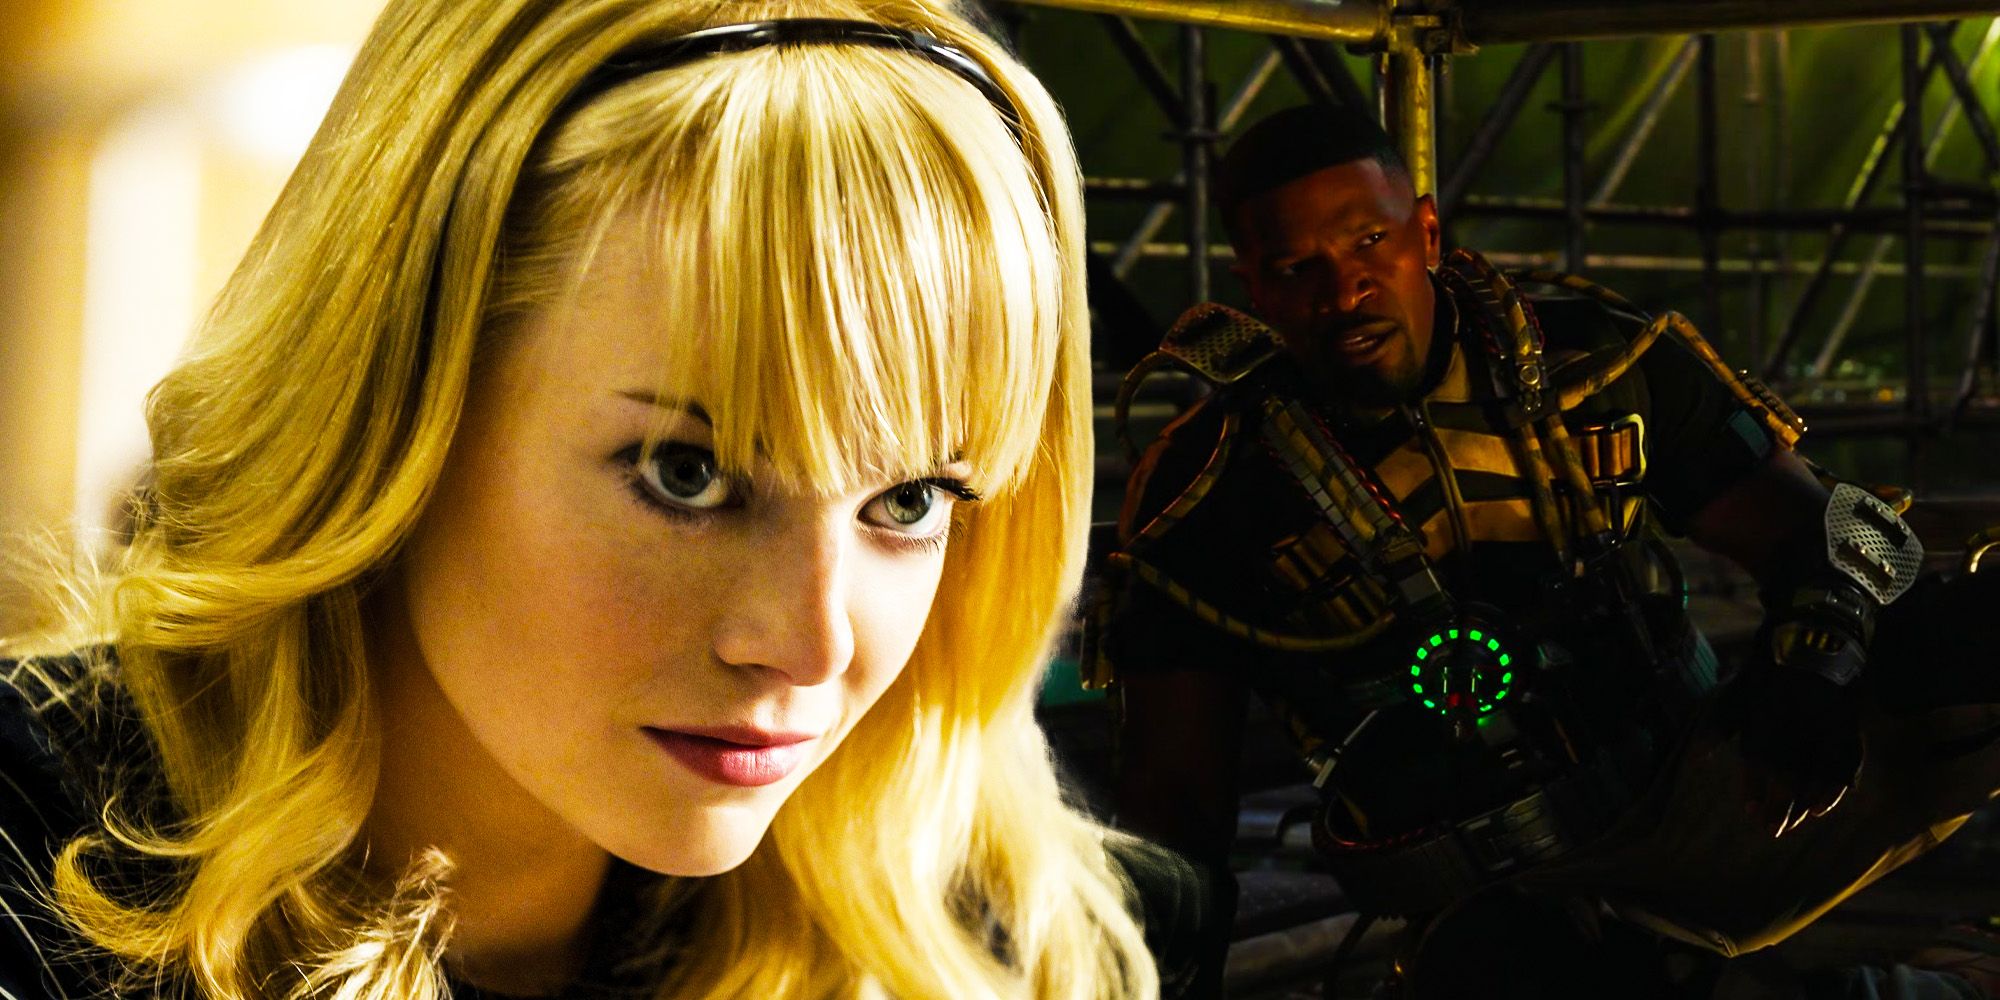 No way home curing Electro saves Gwen stacy